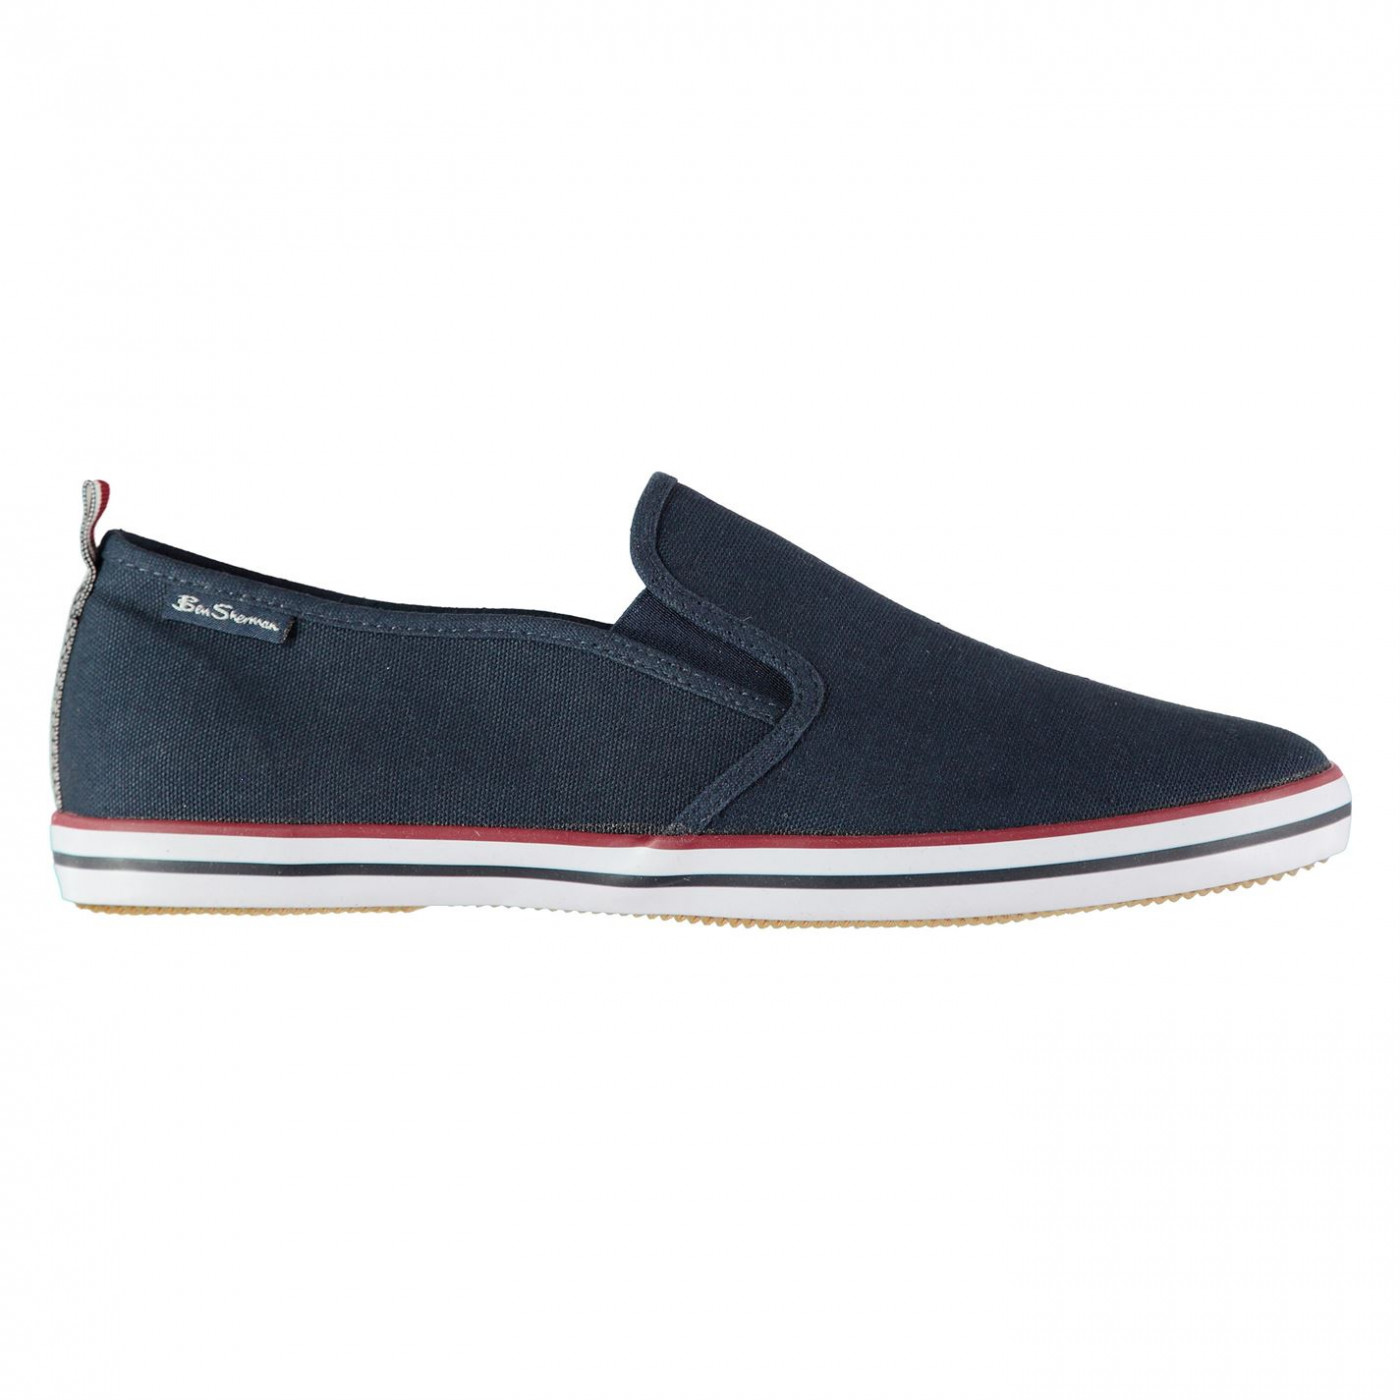 Ben Sherman Leigh Slip On Canvas Trainers